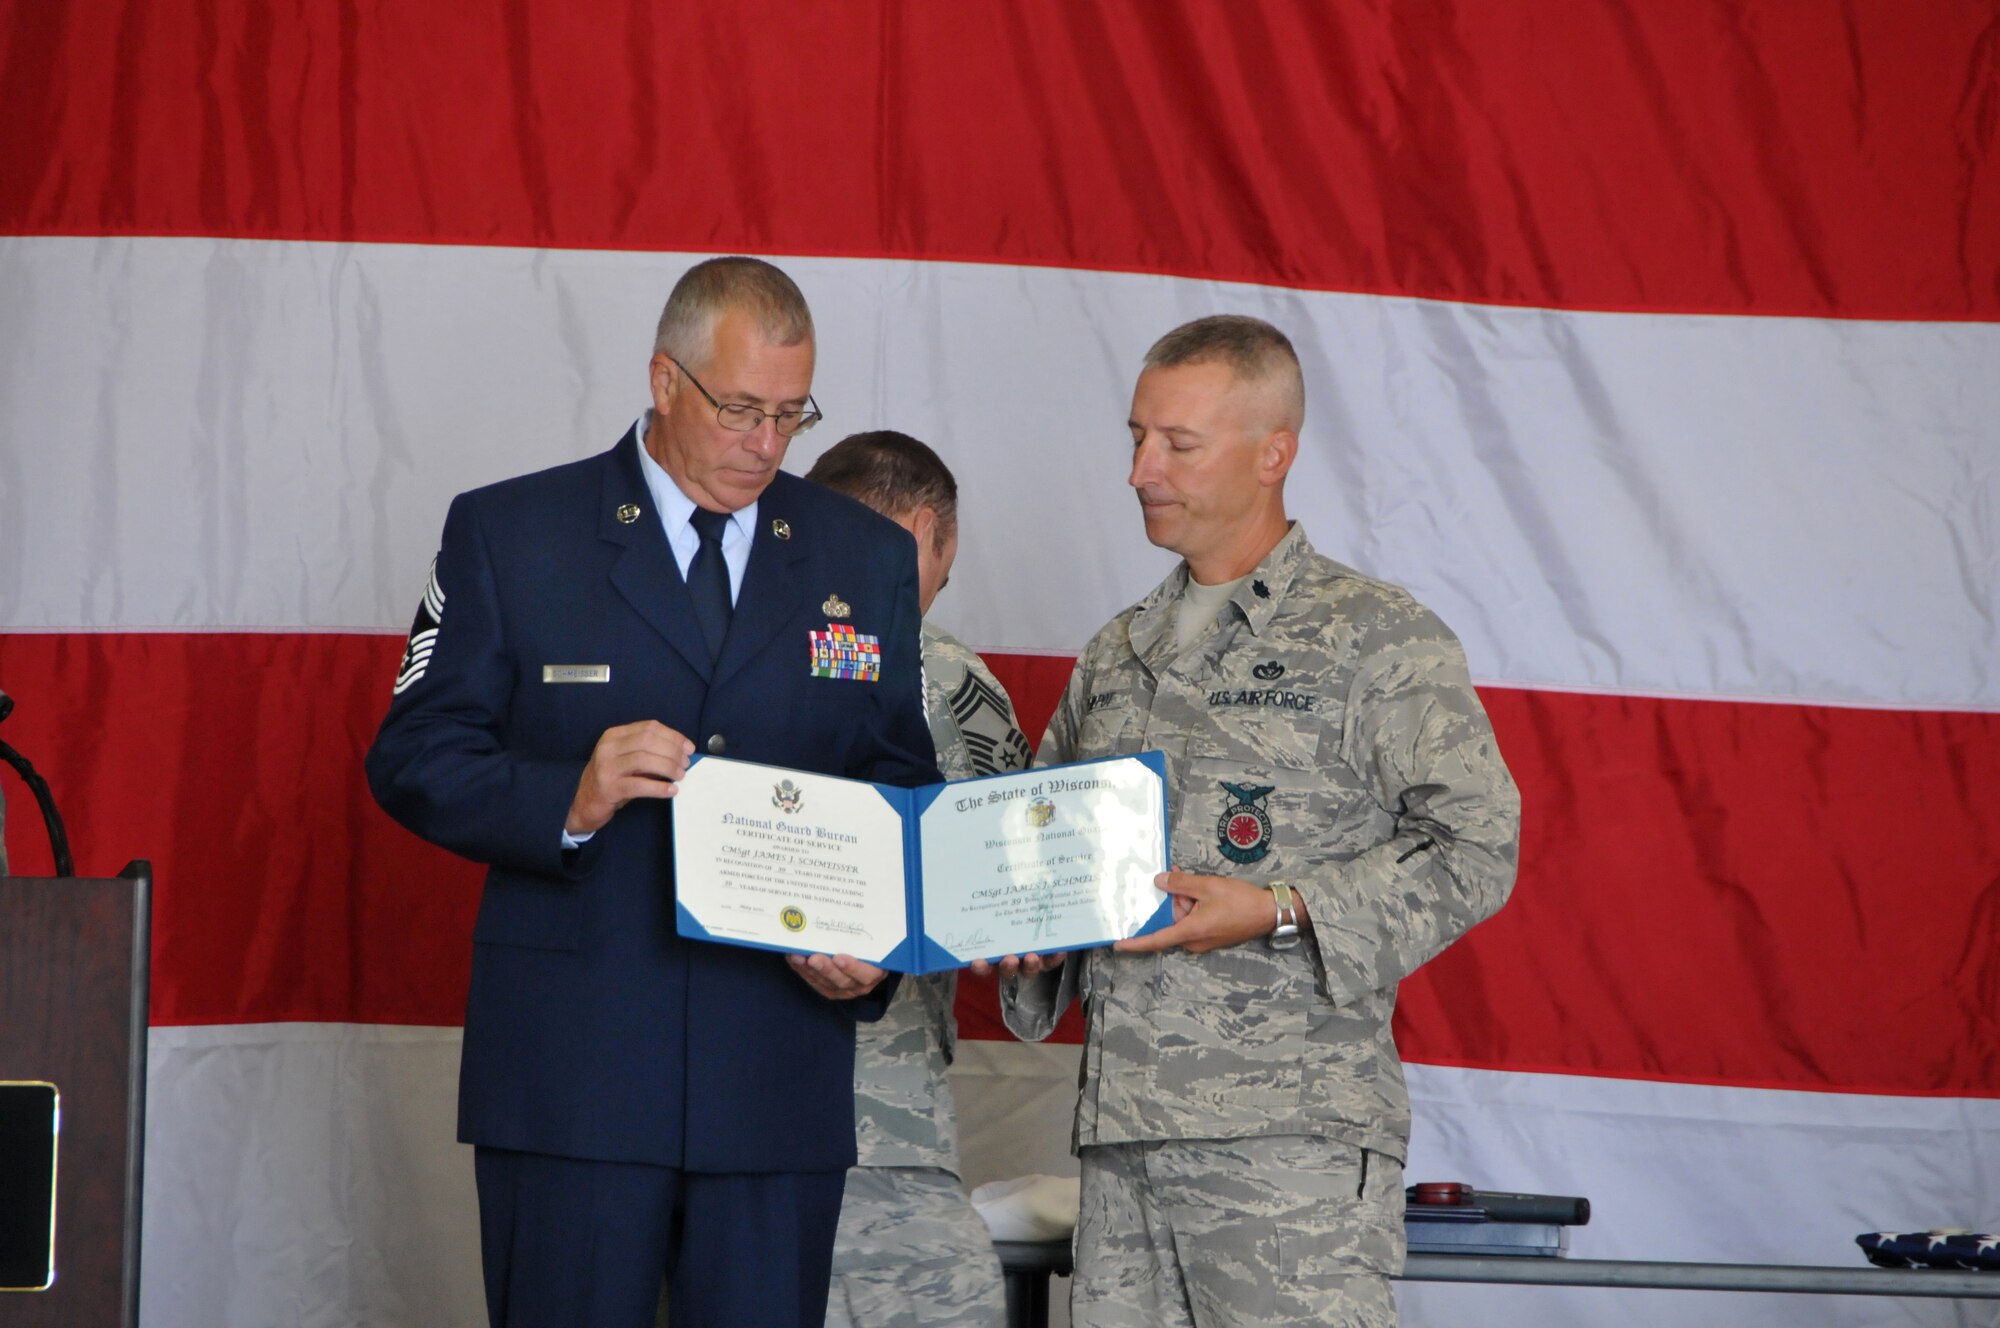 The 115th Fighter Wing held a retirement ceremony here for Chief Master Sgt. James Schmeisser, Sept. 18. During nearly 40 years of military service in the Wisconsin Air National Guard, Chief Schmeisser deployed over 15 times with the 115th Civil Engineering Squadron to locations all over the world. In his final year with the 115th FW, Chief Schmeisser served as the interim command chief for nine months. (U.S. Air Force photo by Tech. Sgt. Ashley Bell)